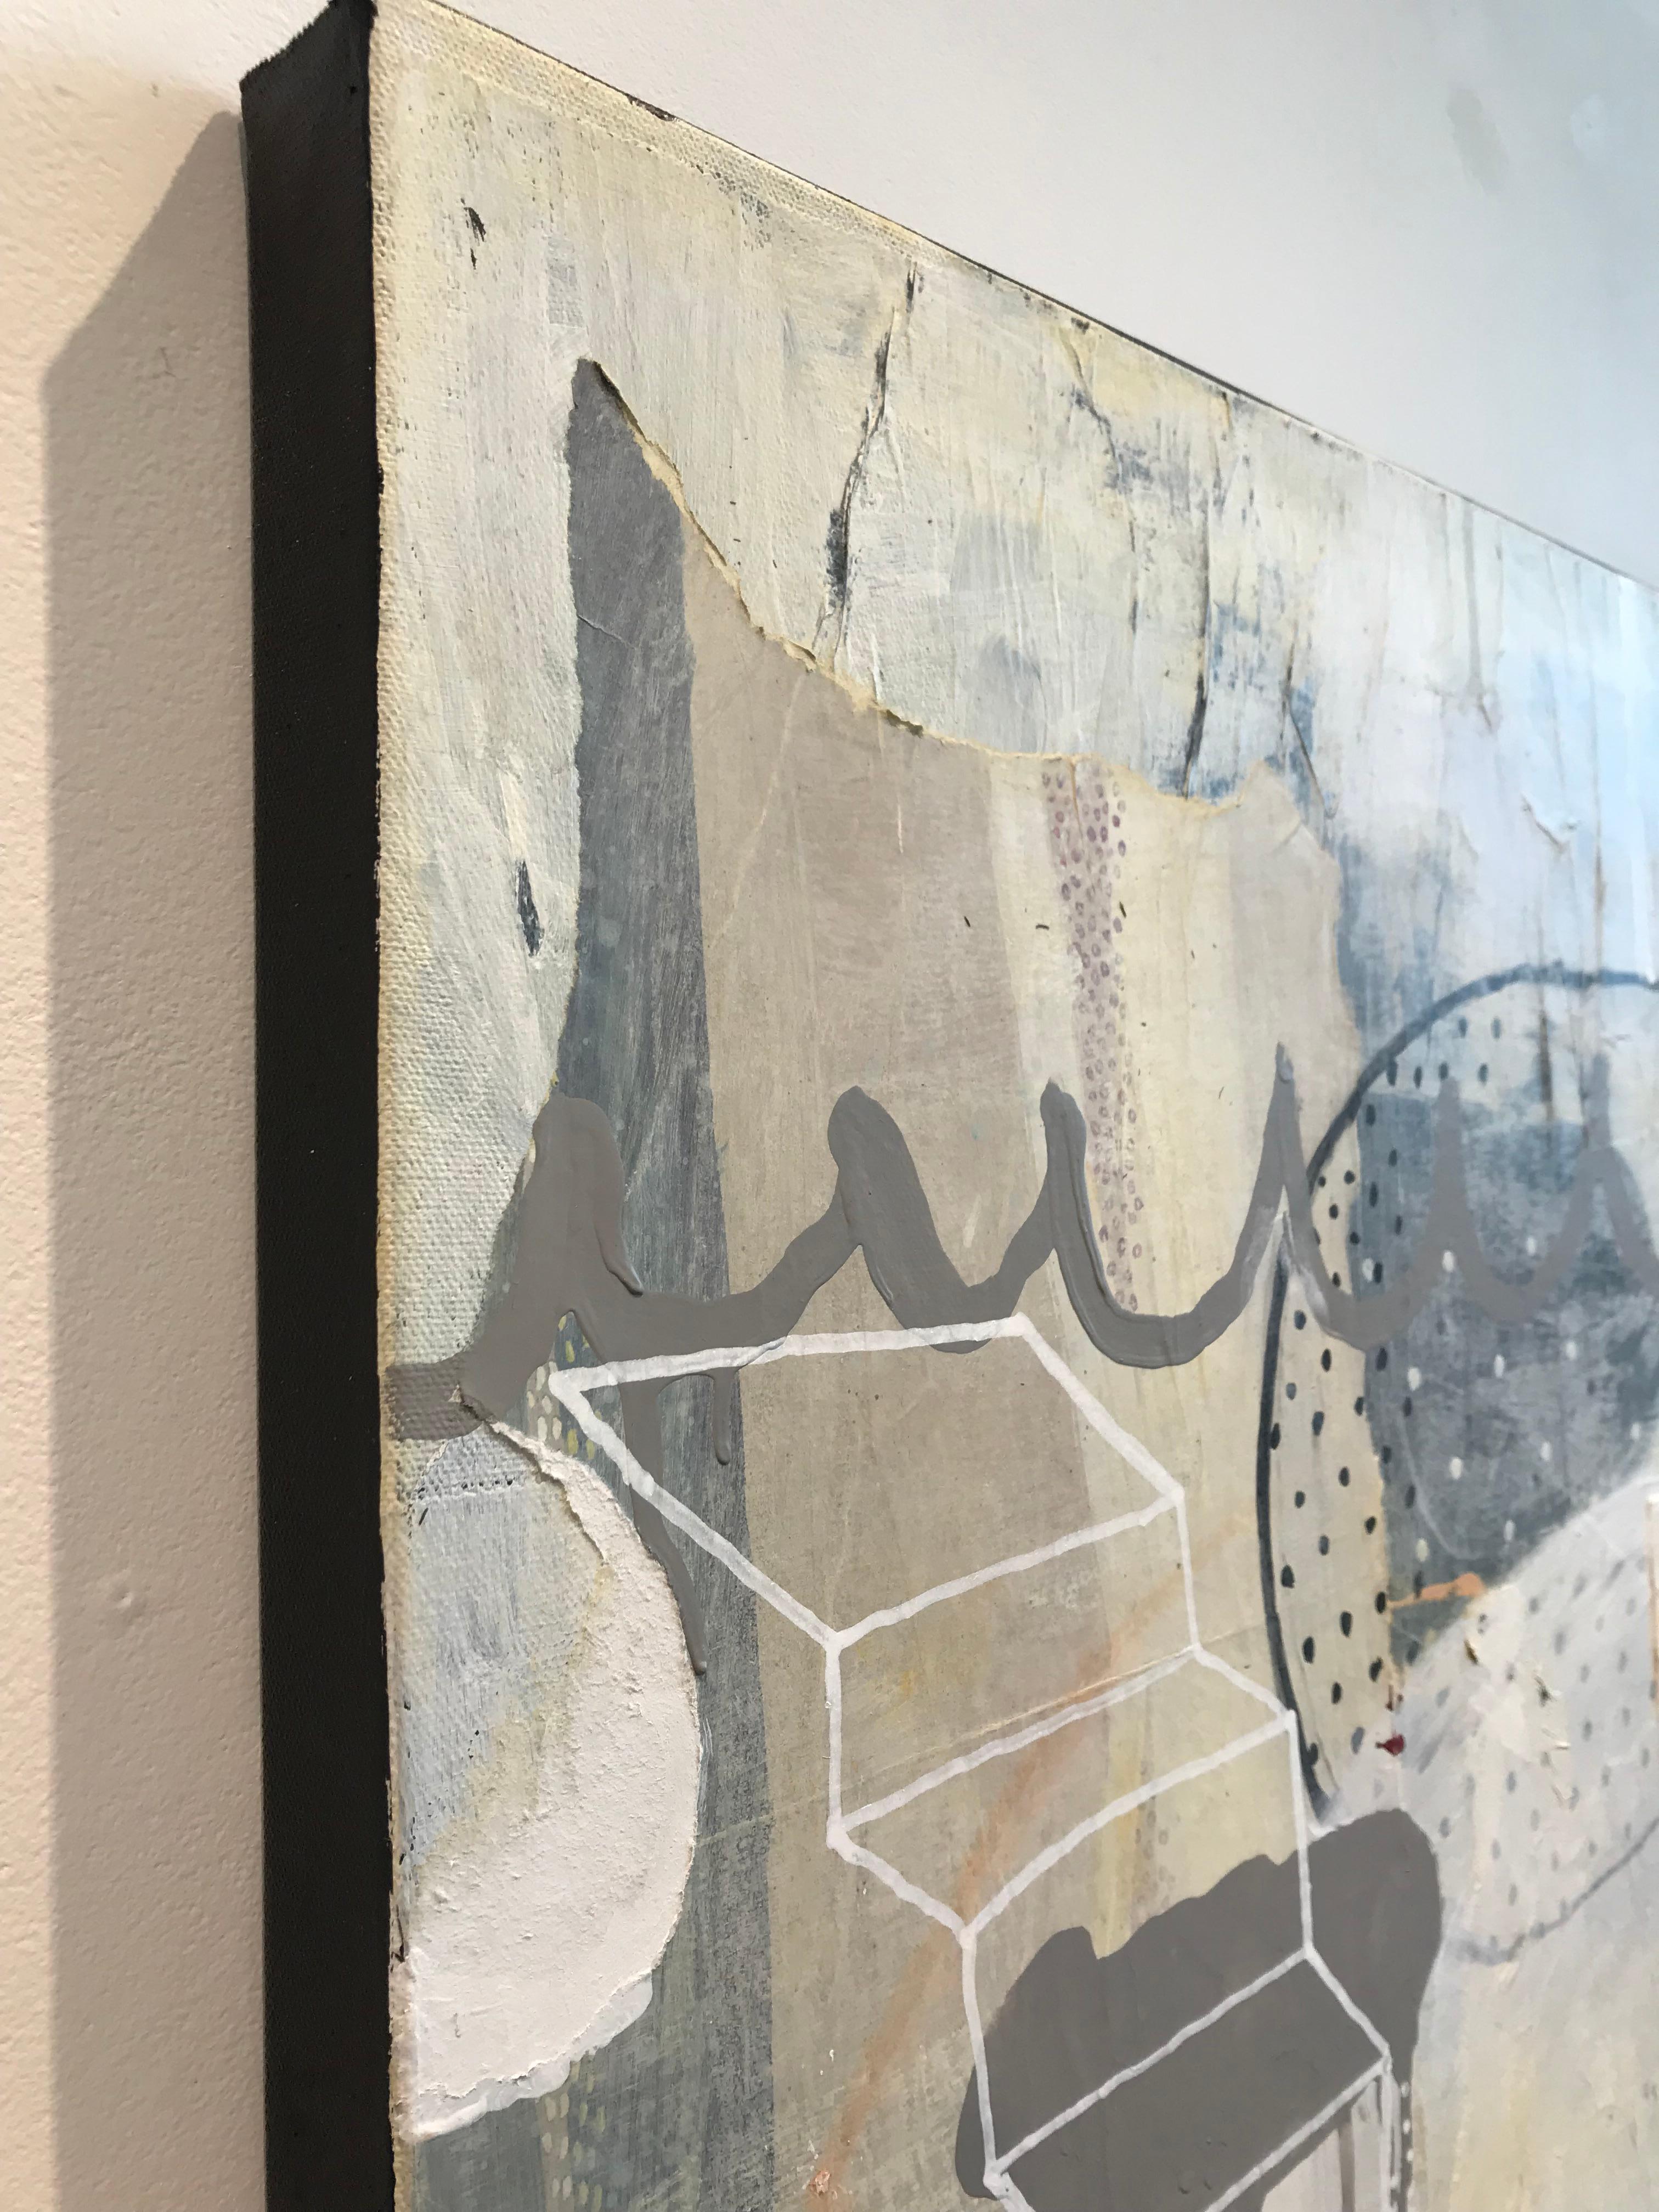 Never By Chance is a contemporary mixed media piece by artist Maria Najera. In this piece, Najera combines recognizable elements, such as a staircase and text that reads “poplat,” with more abstract elements. The colors are mostly muted greys, white